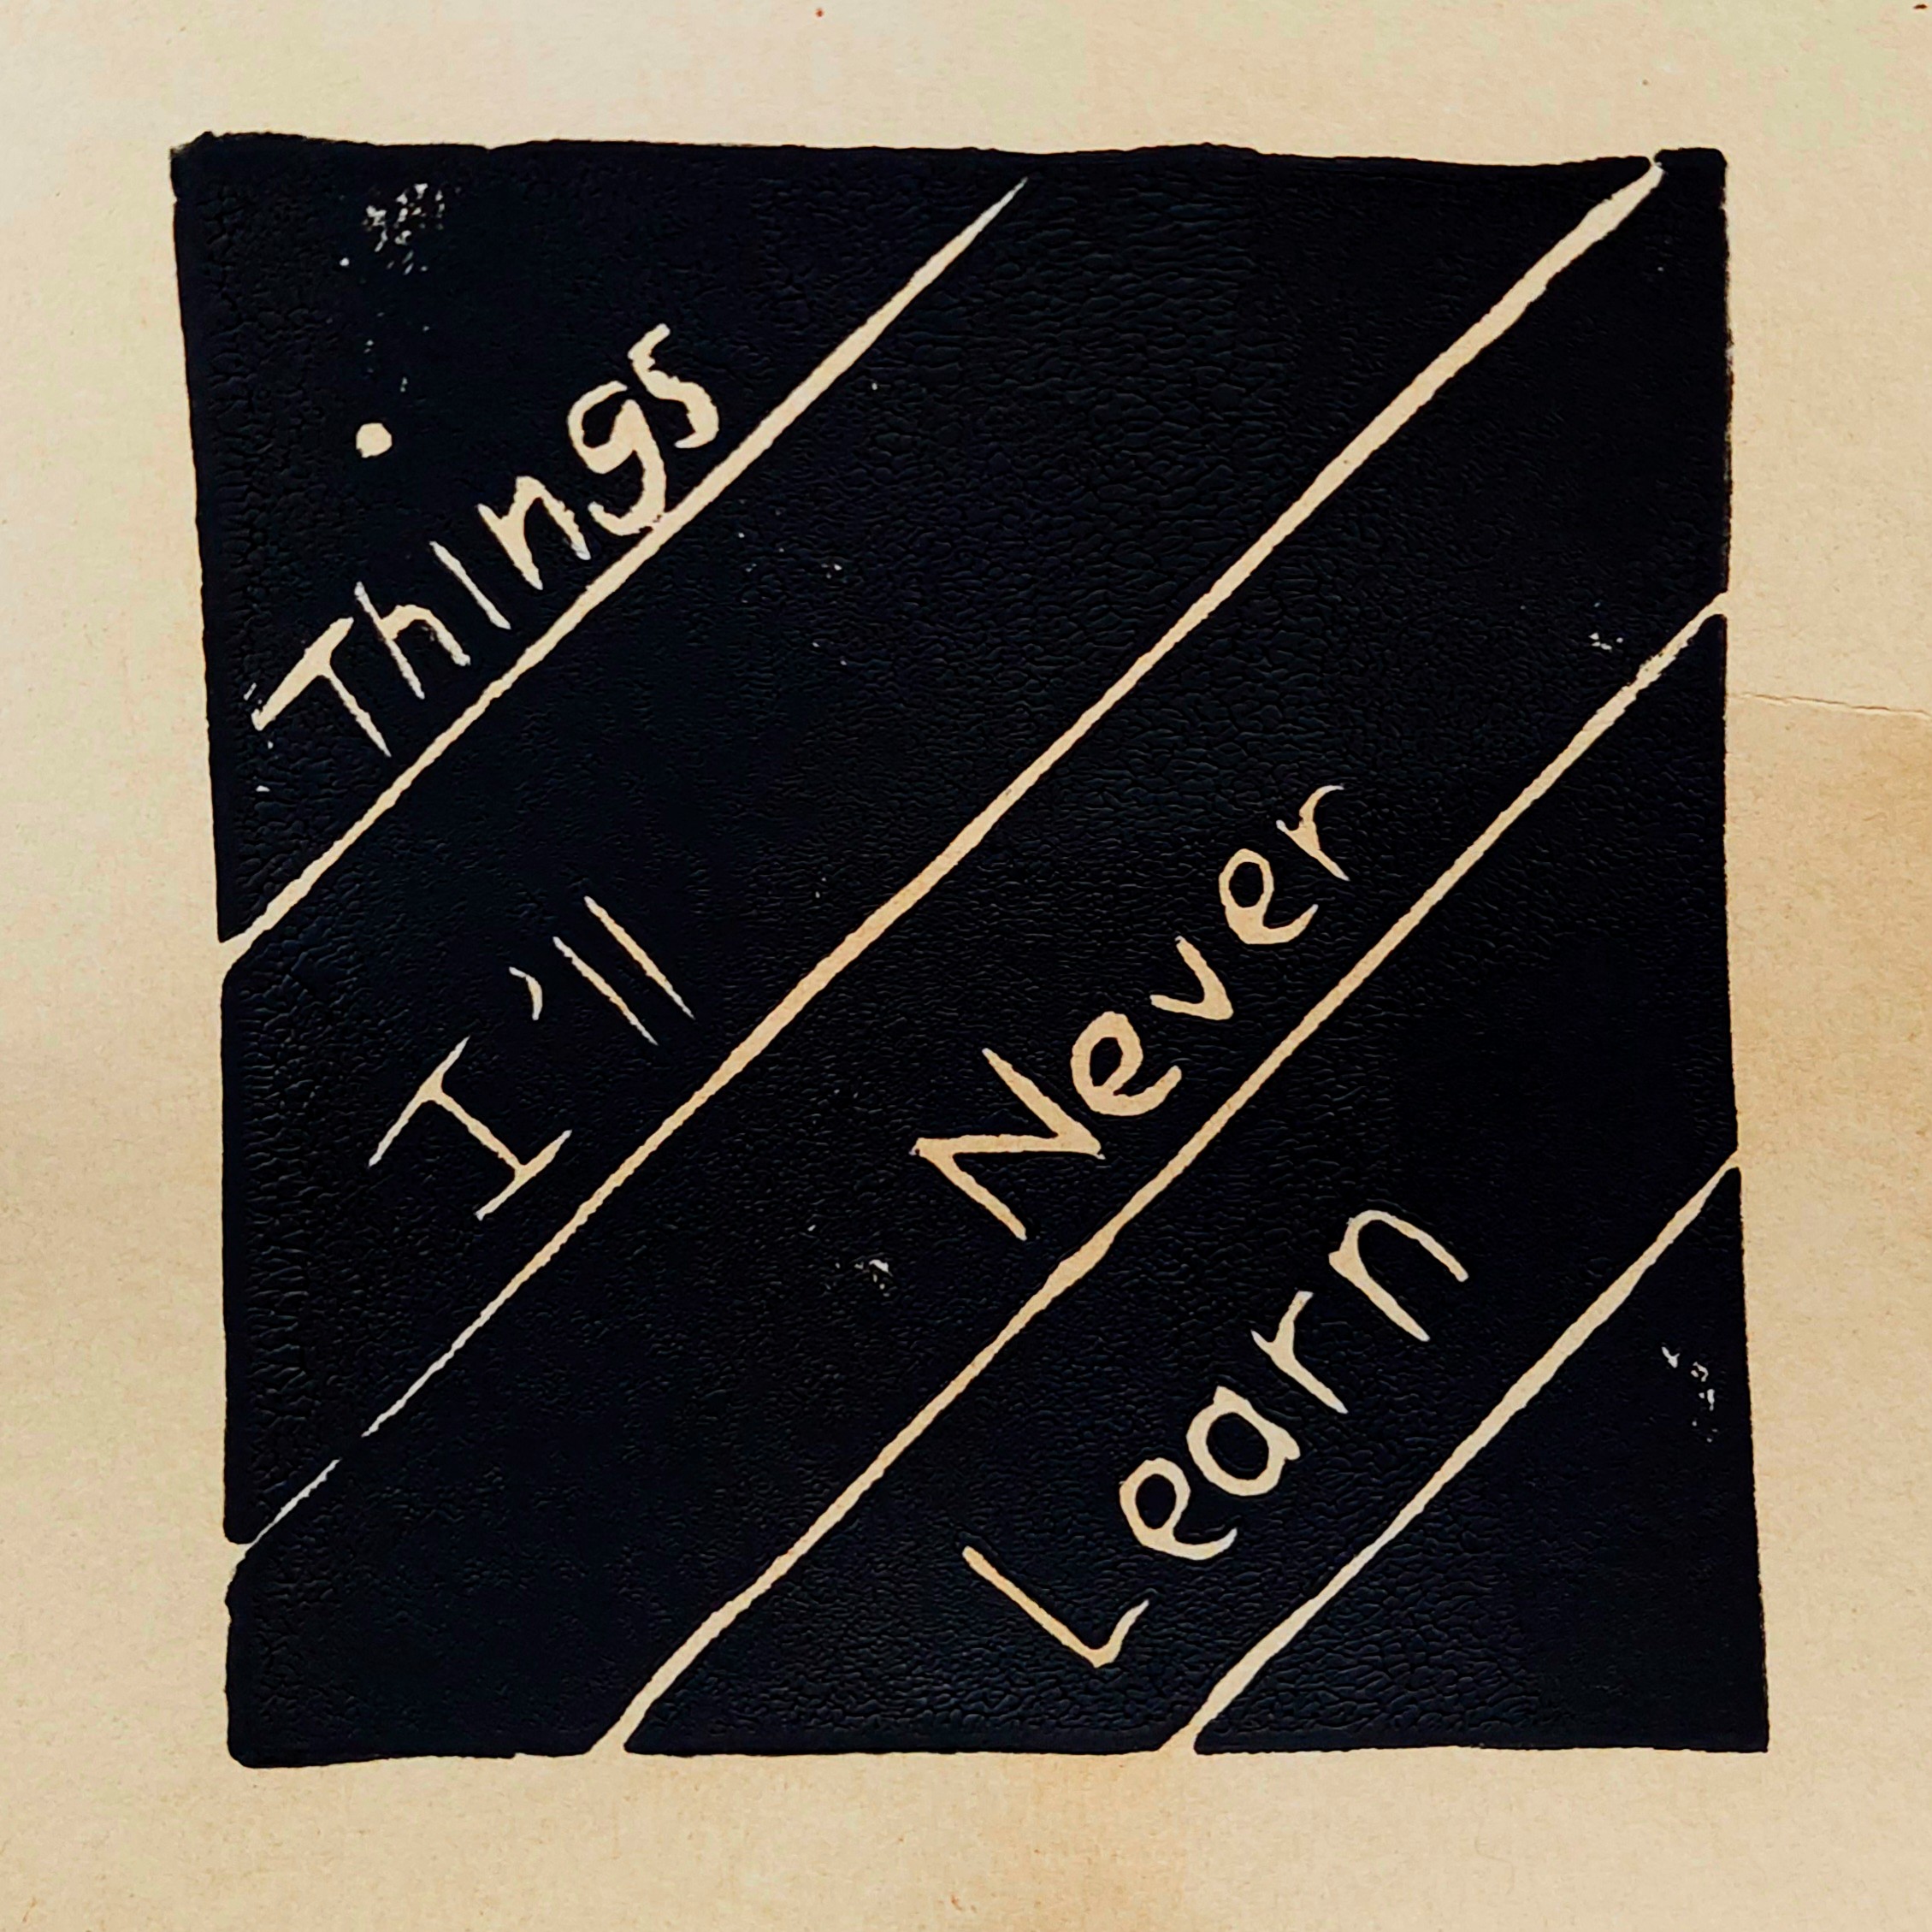 The Bankes Brothers “Things I’ll Never Learn” single artwork